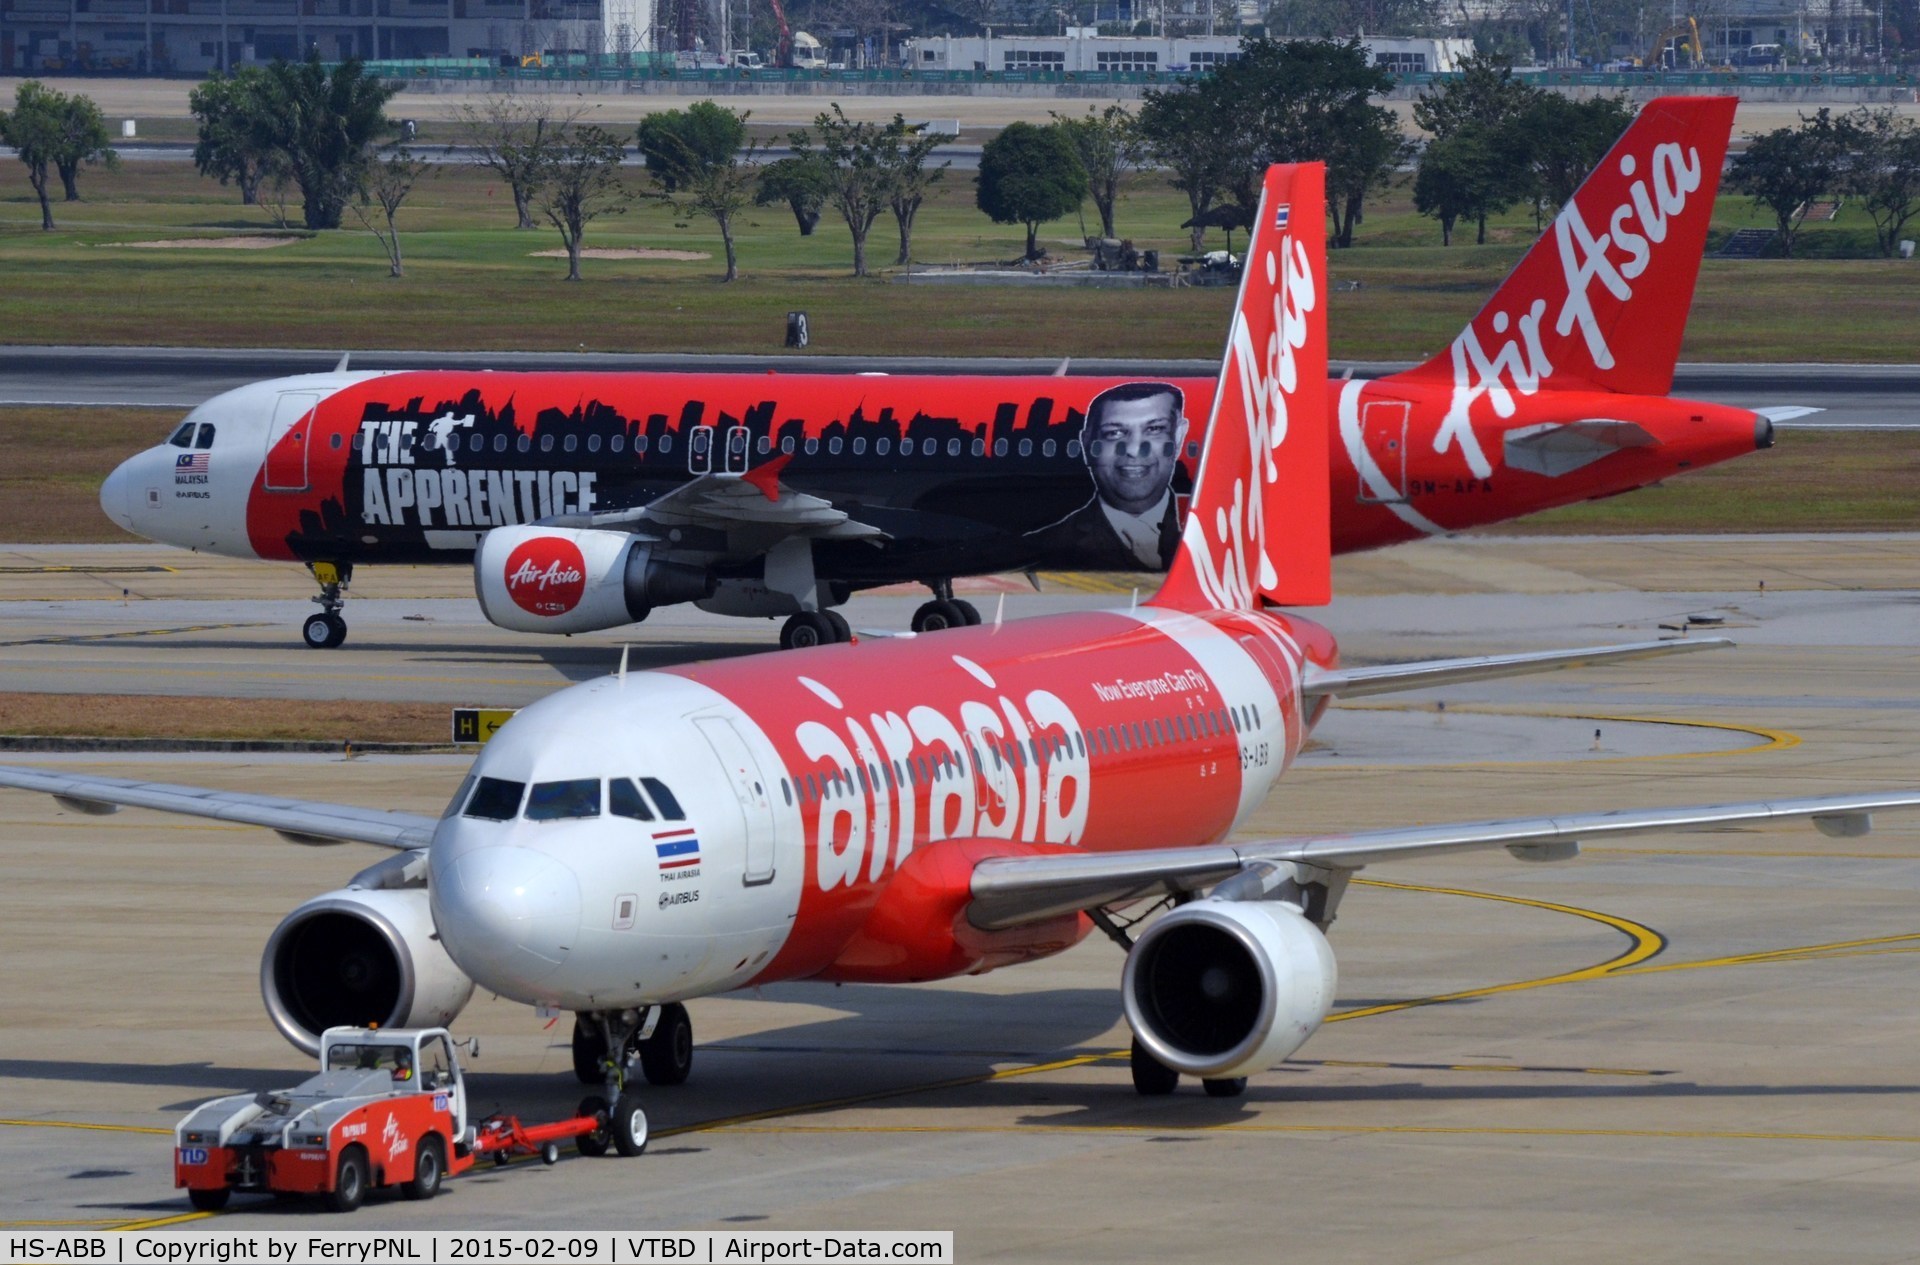 HS-ABB, 2007 Airbus A320-216 C/N 3299, AirAsia A320 pushed-back while another one taxyies past.